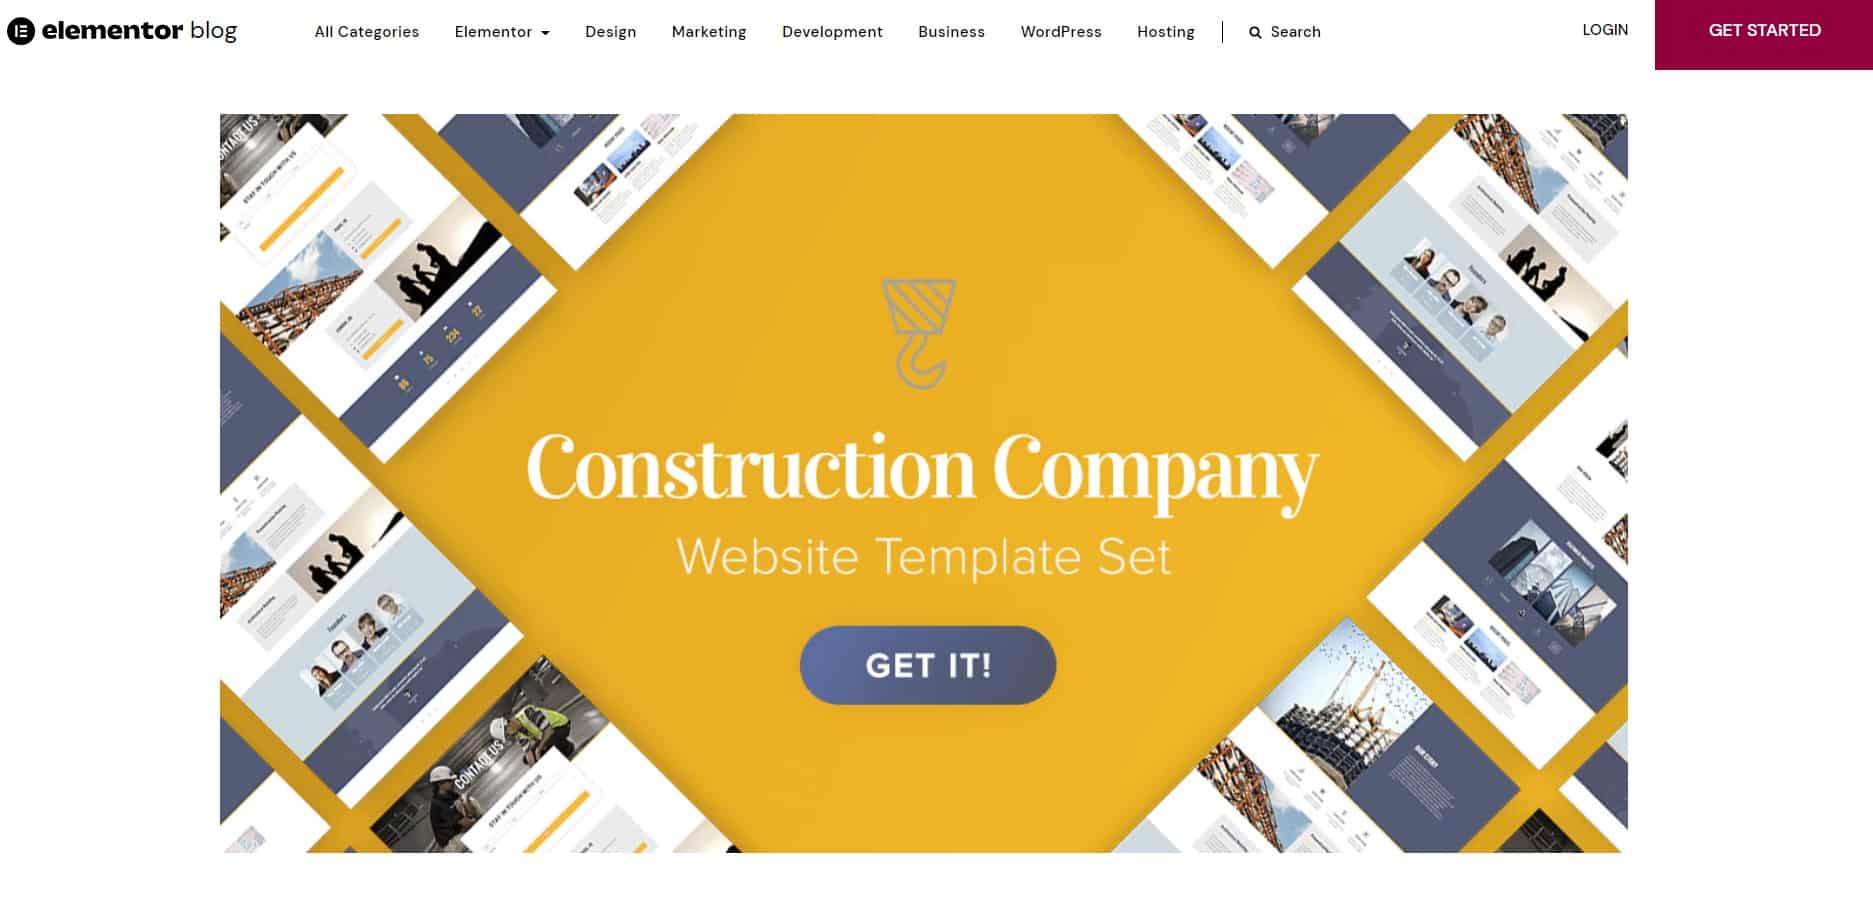 seo for construction wordpress templates for construction